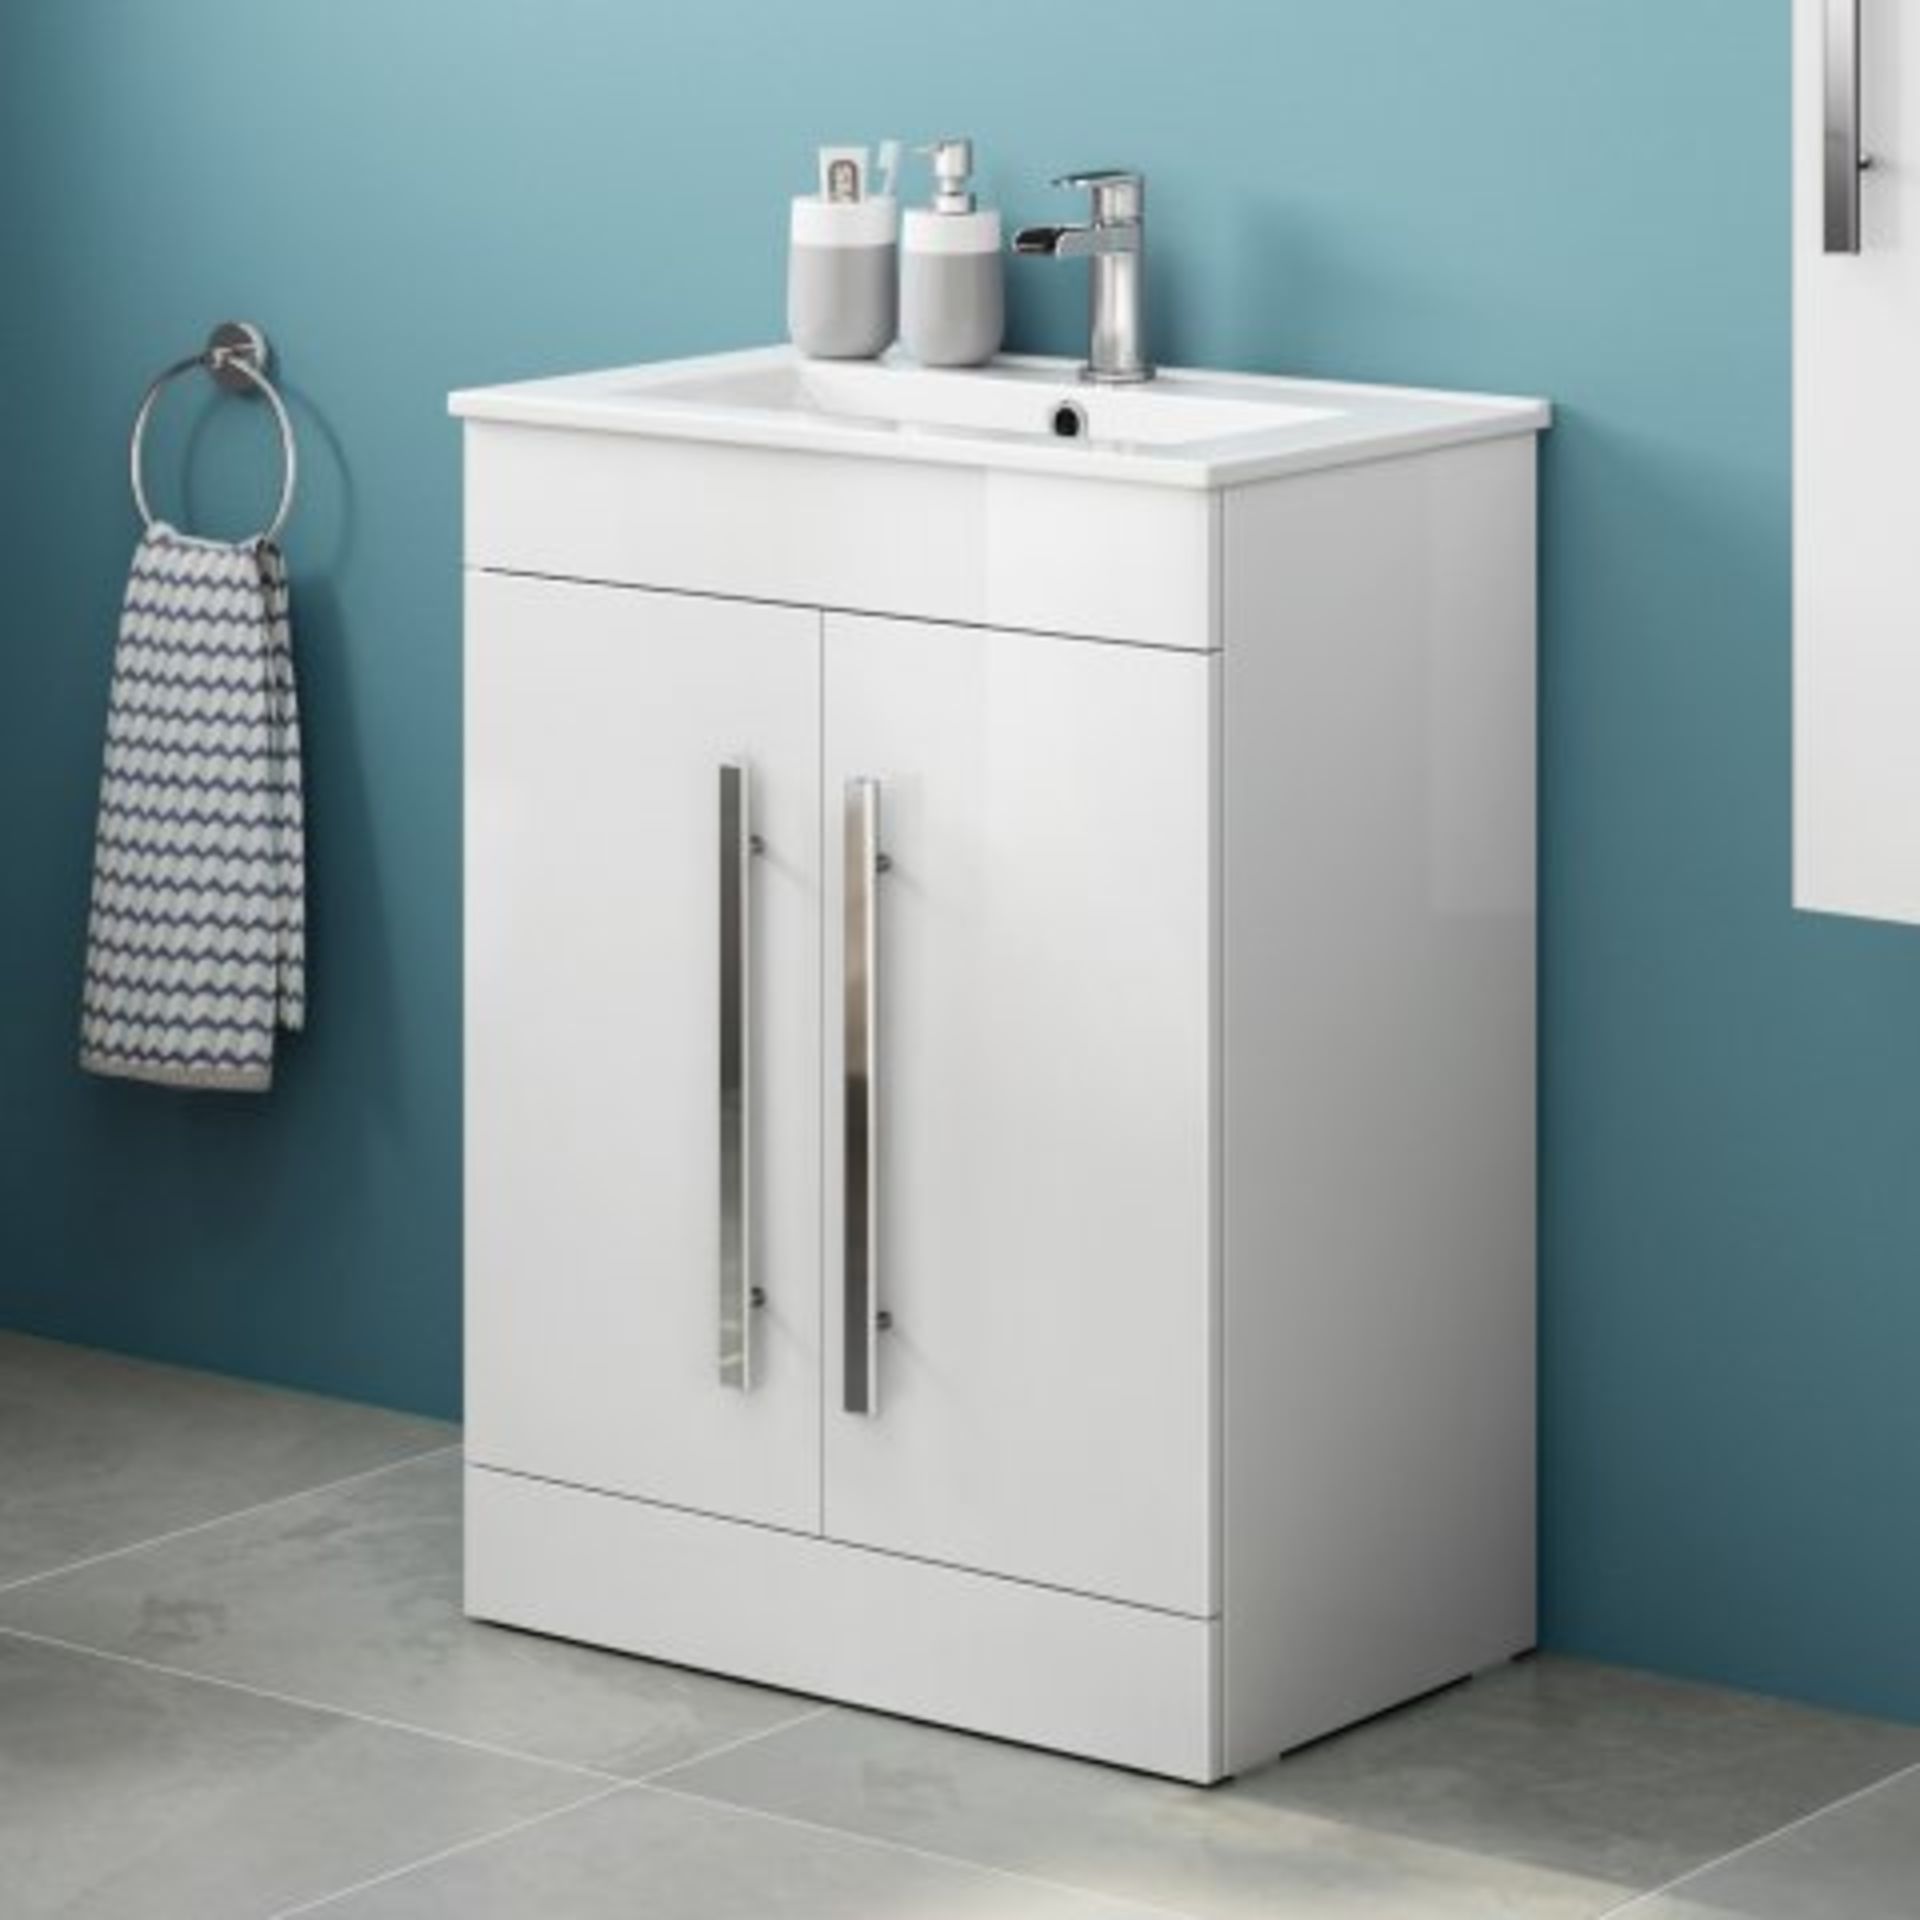 (I206) 600mm Avon High Gloss White Basin Cabinet - Floor Standing. RRP £499.99. COMES COMPLETE